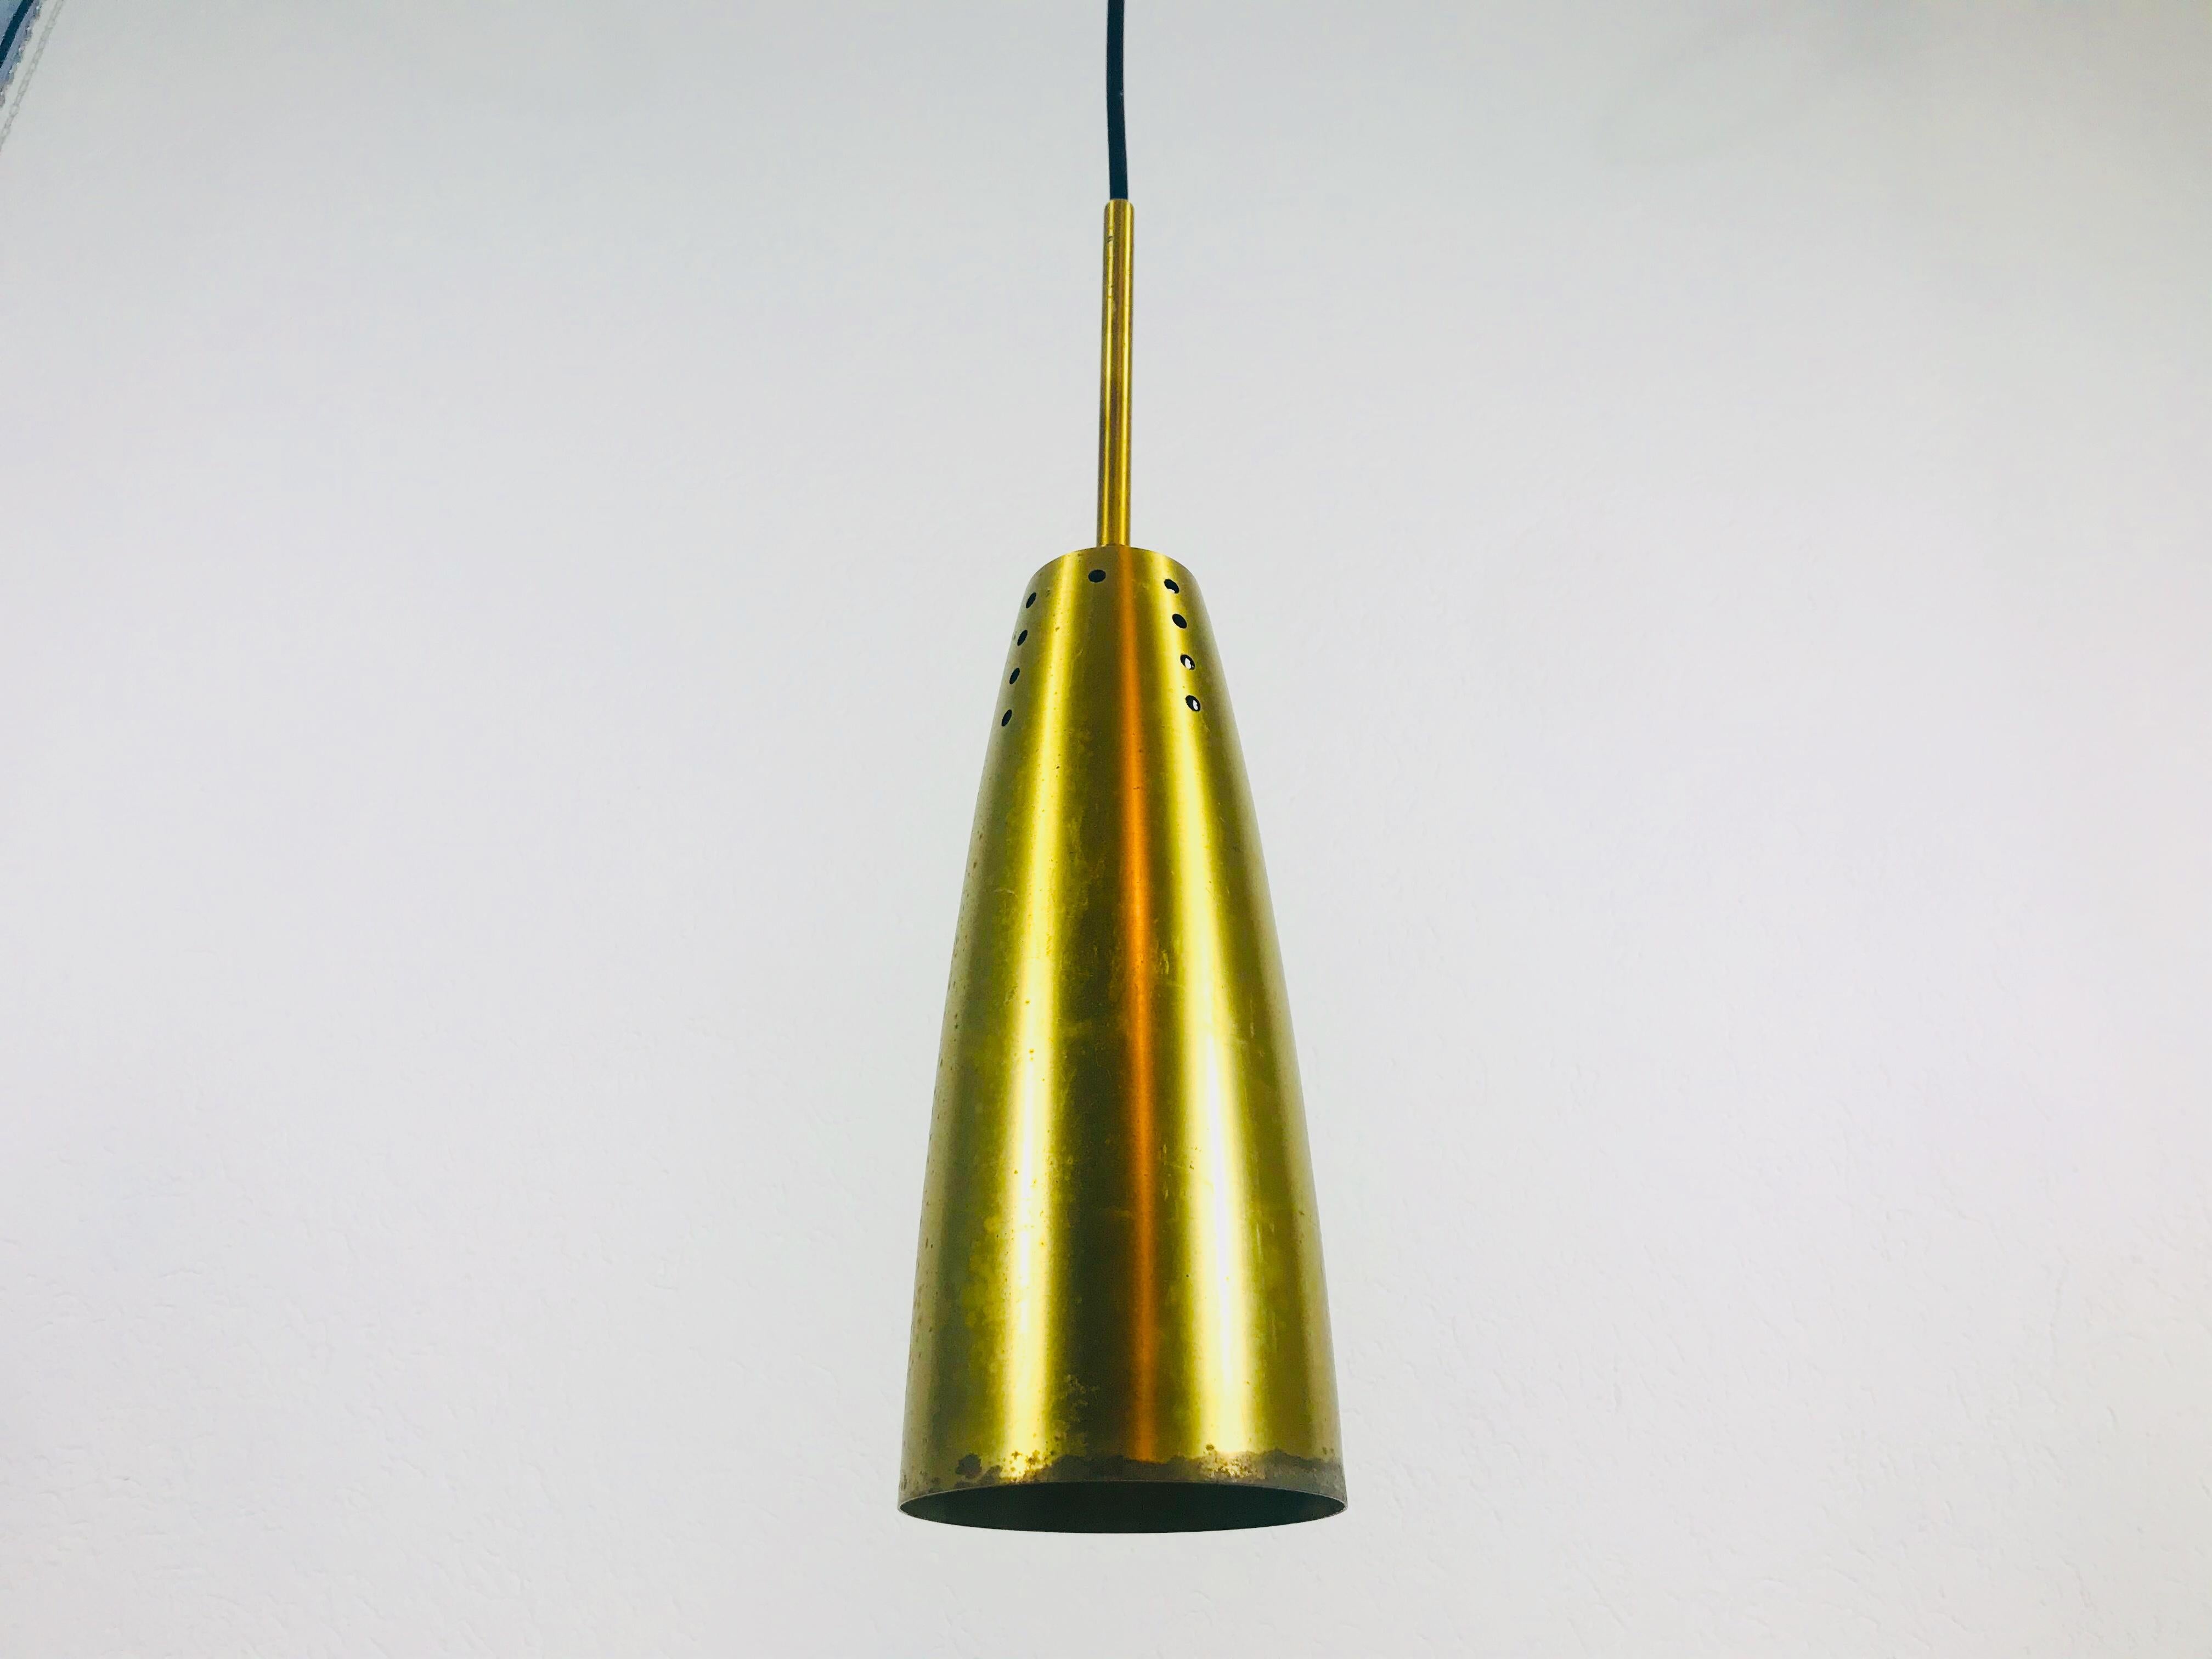 Pair of Full Brass Mid-Century Modern Pendant Lamps, 1950s, Germany For Sale 1